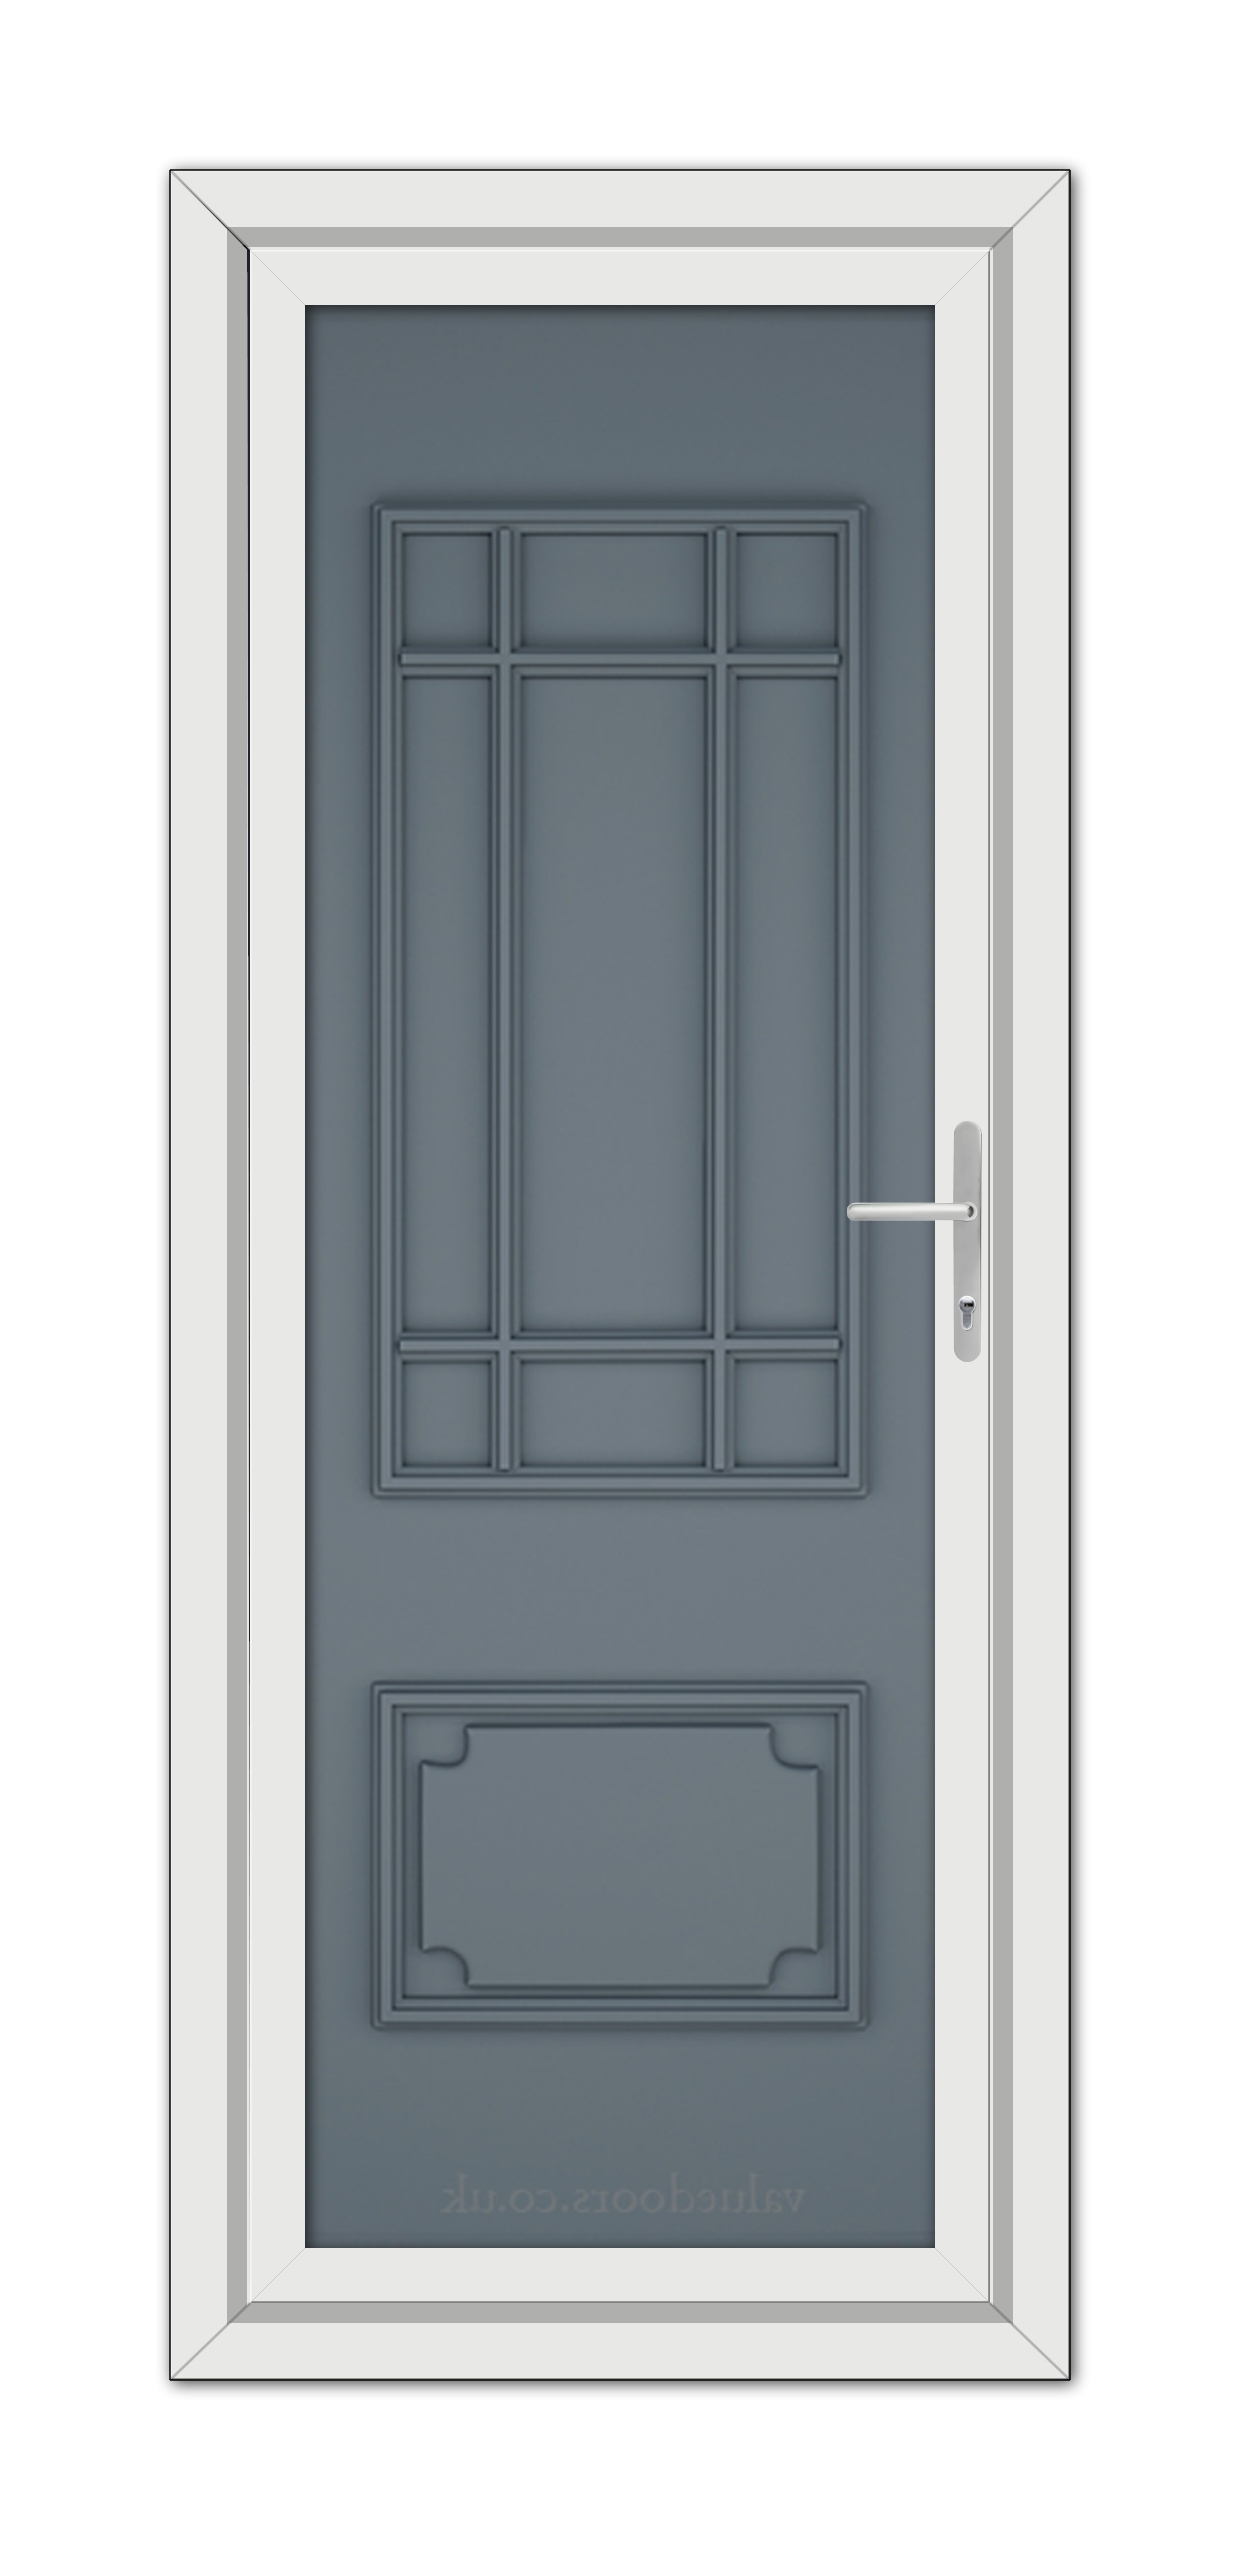 A Slate Grey Seville Solid uPVC door with a white frame.